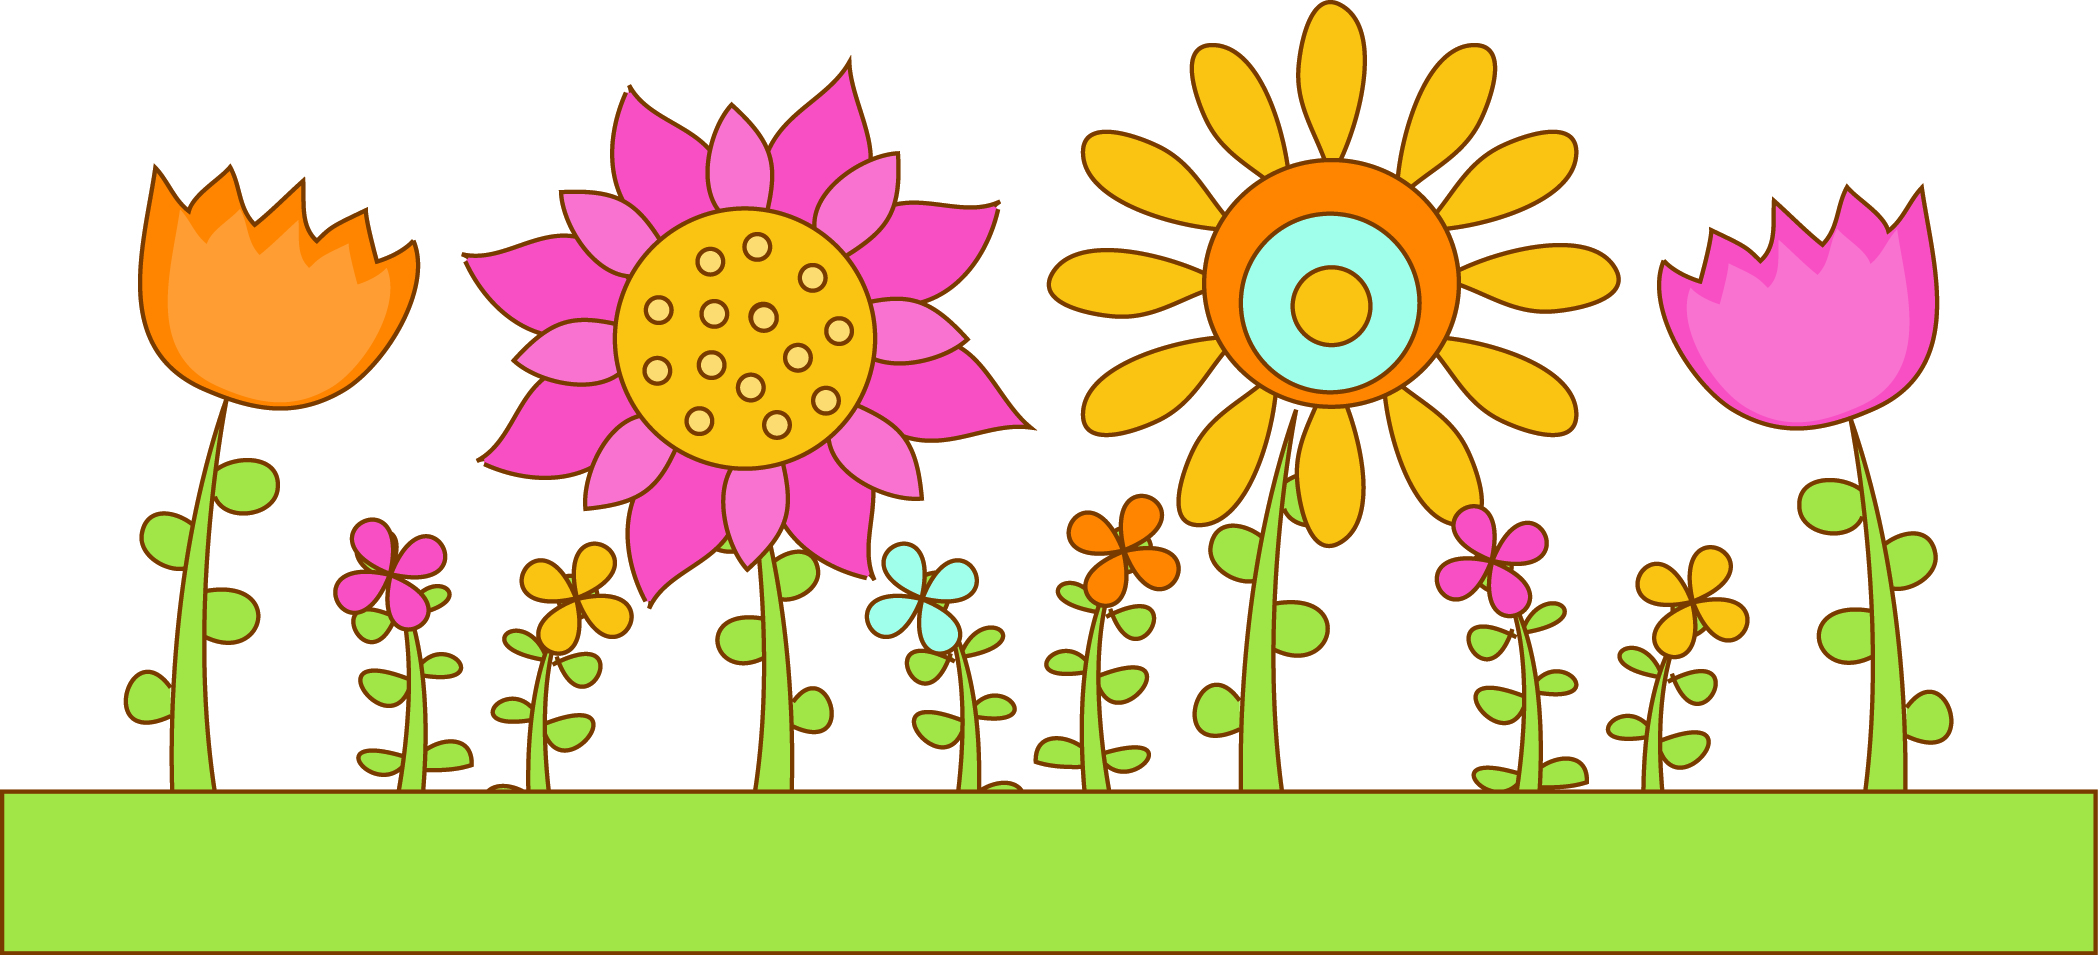 Flowers and garden graphics a